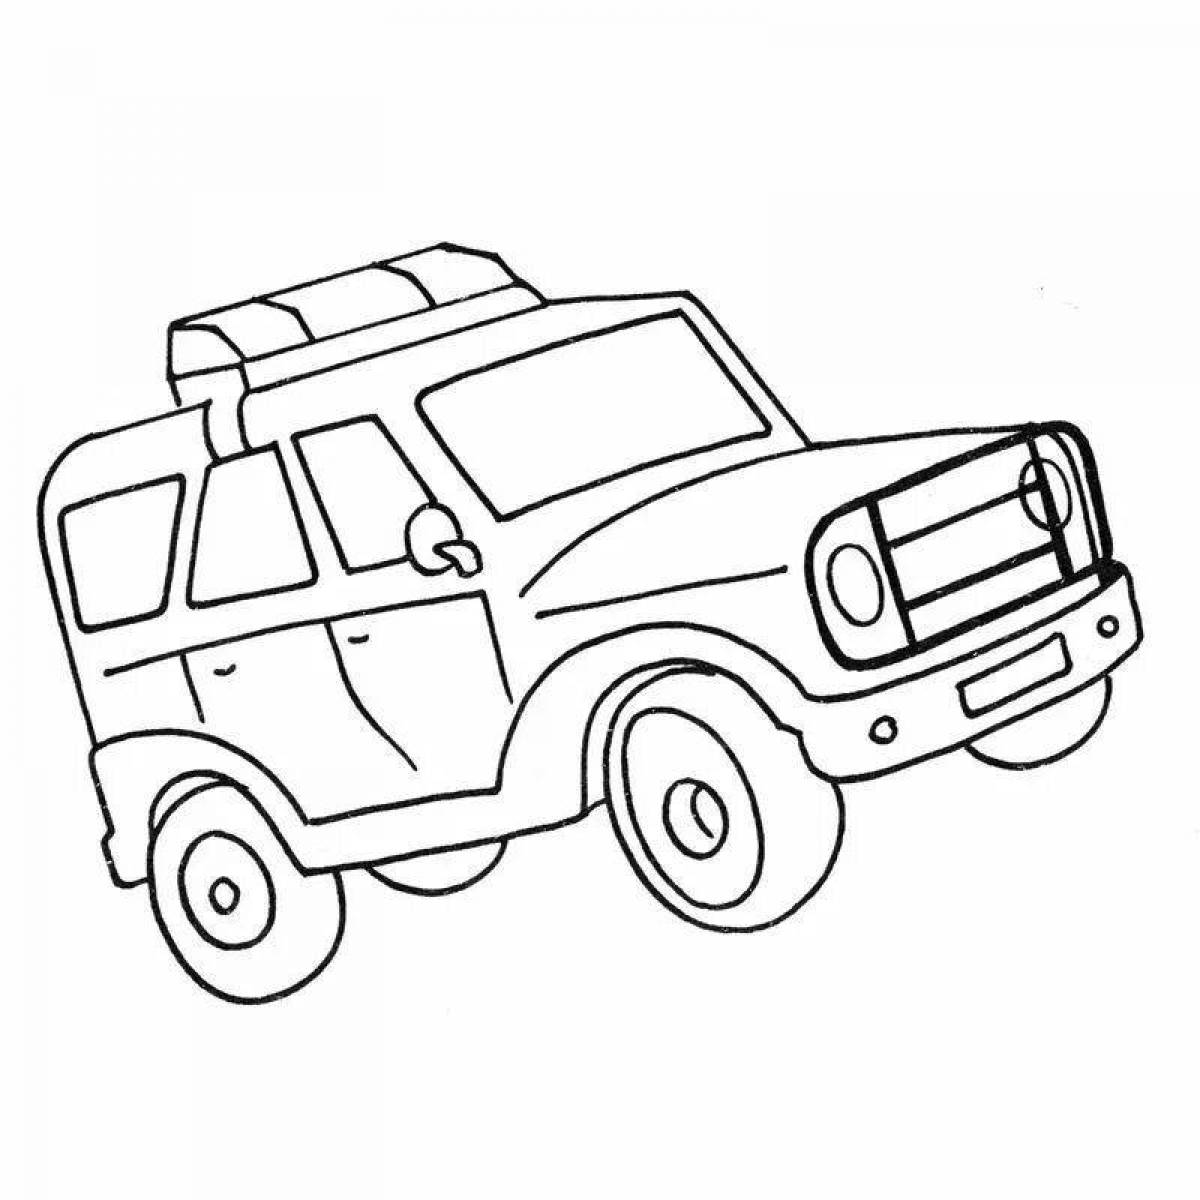 Colorful UAZ police coloring book